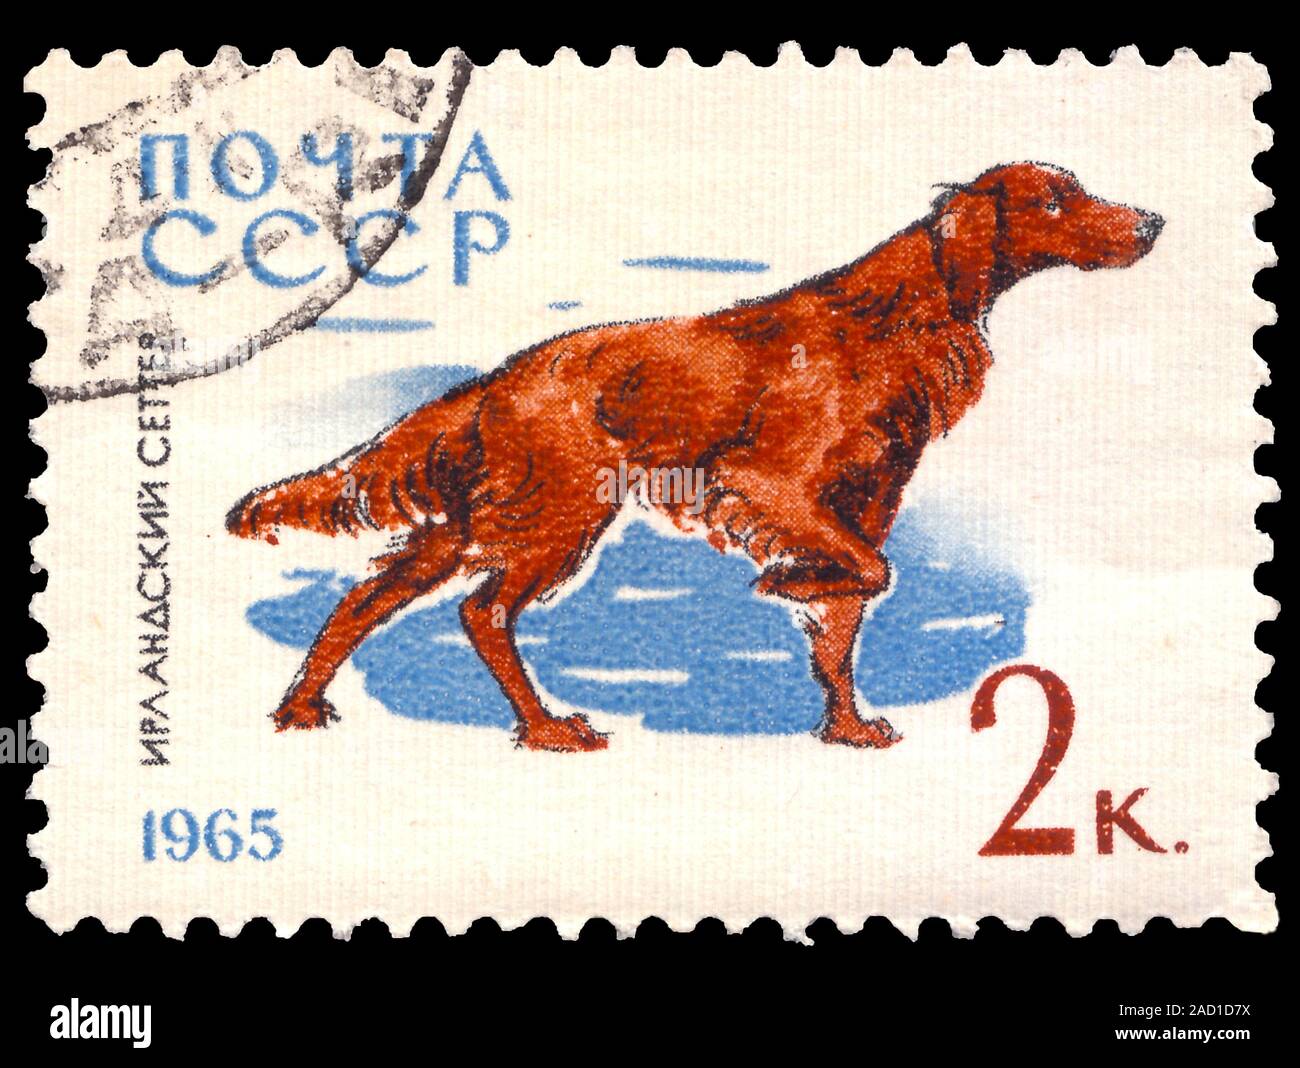 Soviet Union (SSSR) Russia - circa 1965. Postage stamp printed in Soviet Union and part of a series depicting dogs in Soviet Union. Circa 1965 Stock Photo